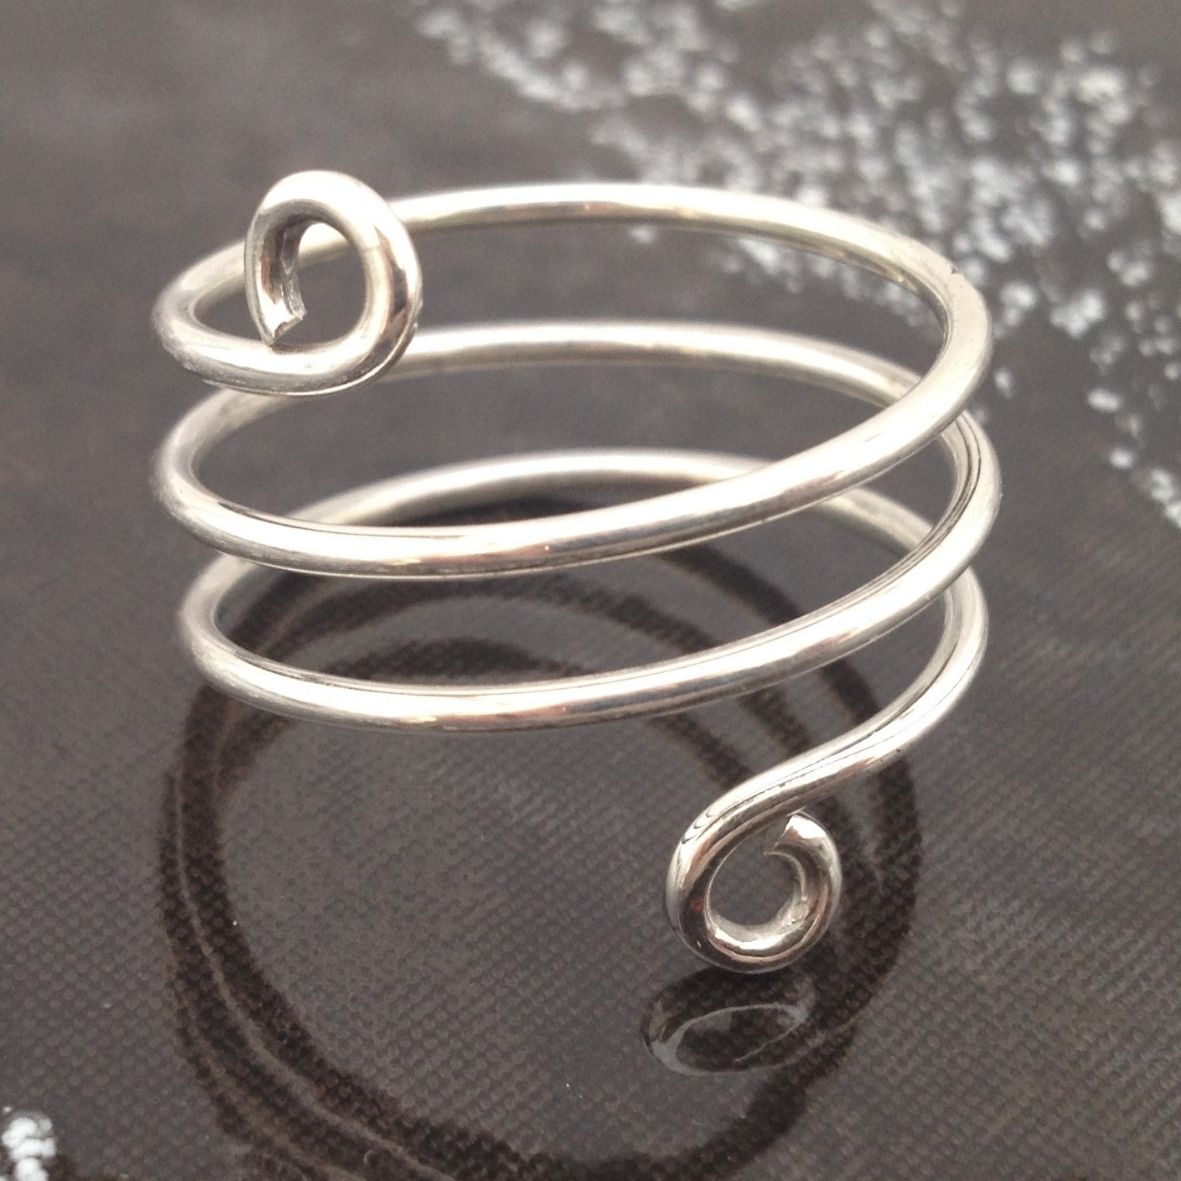 Handmade Silver Spiral Ring made by The Zuri Collection 